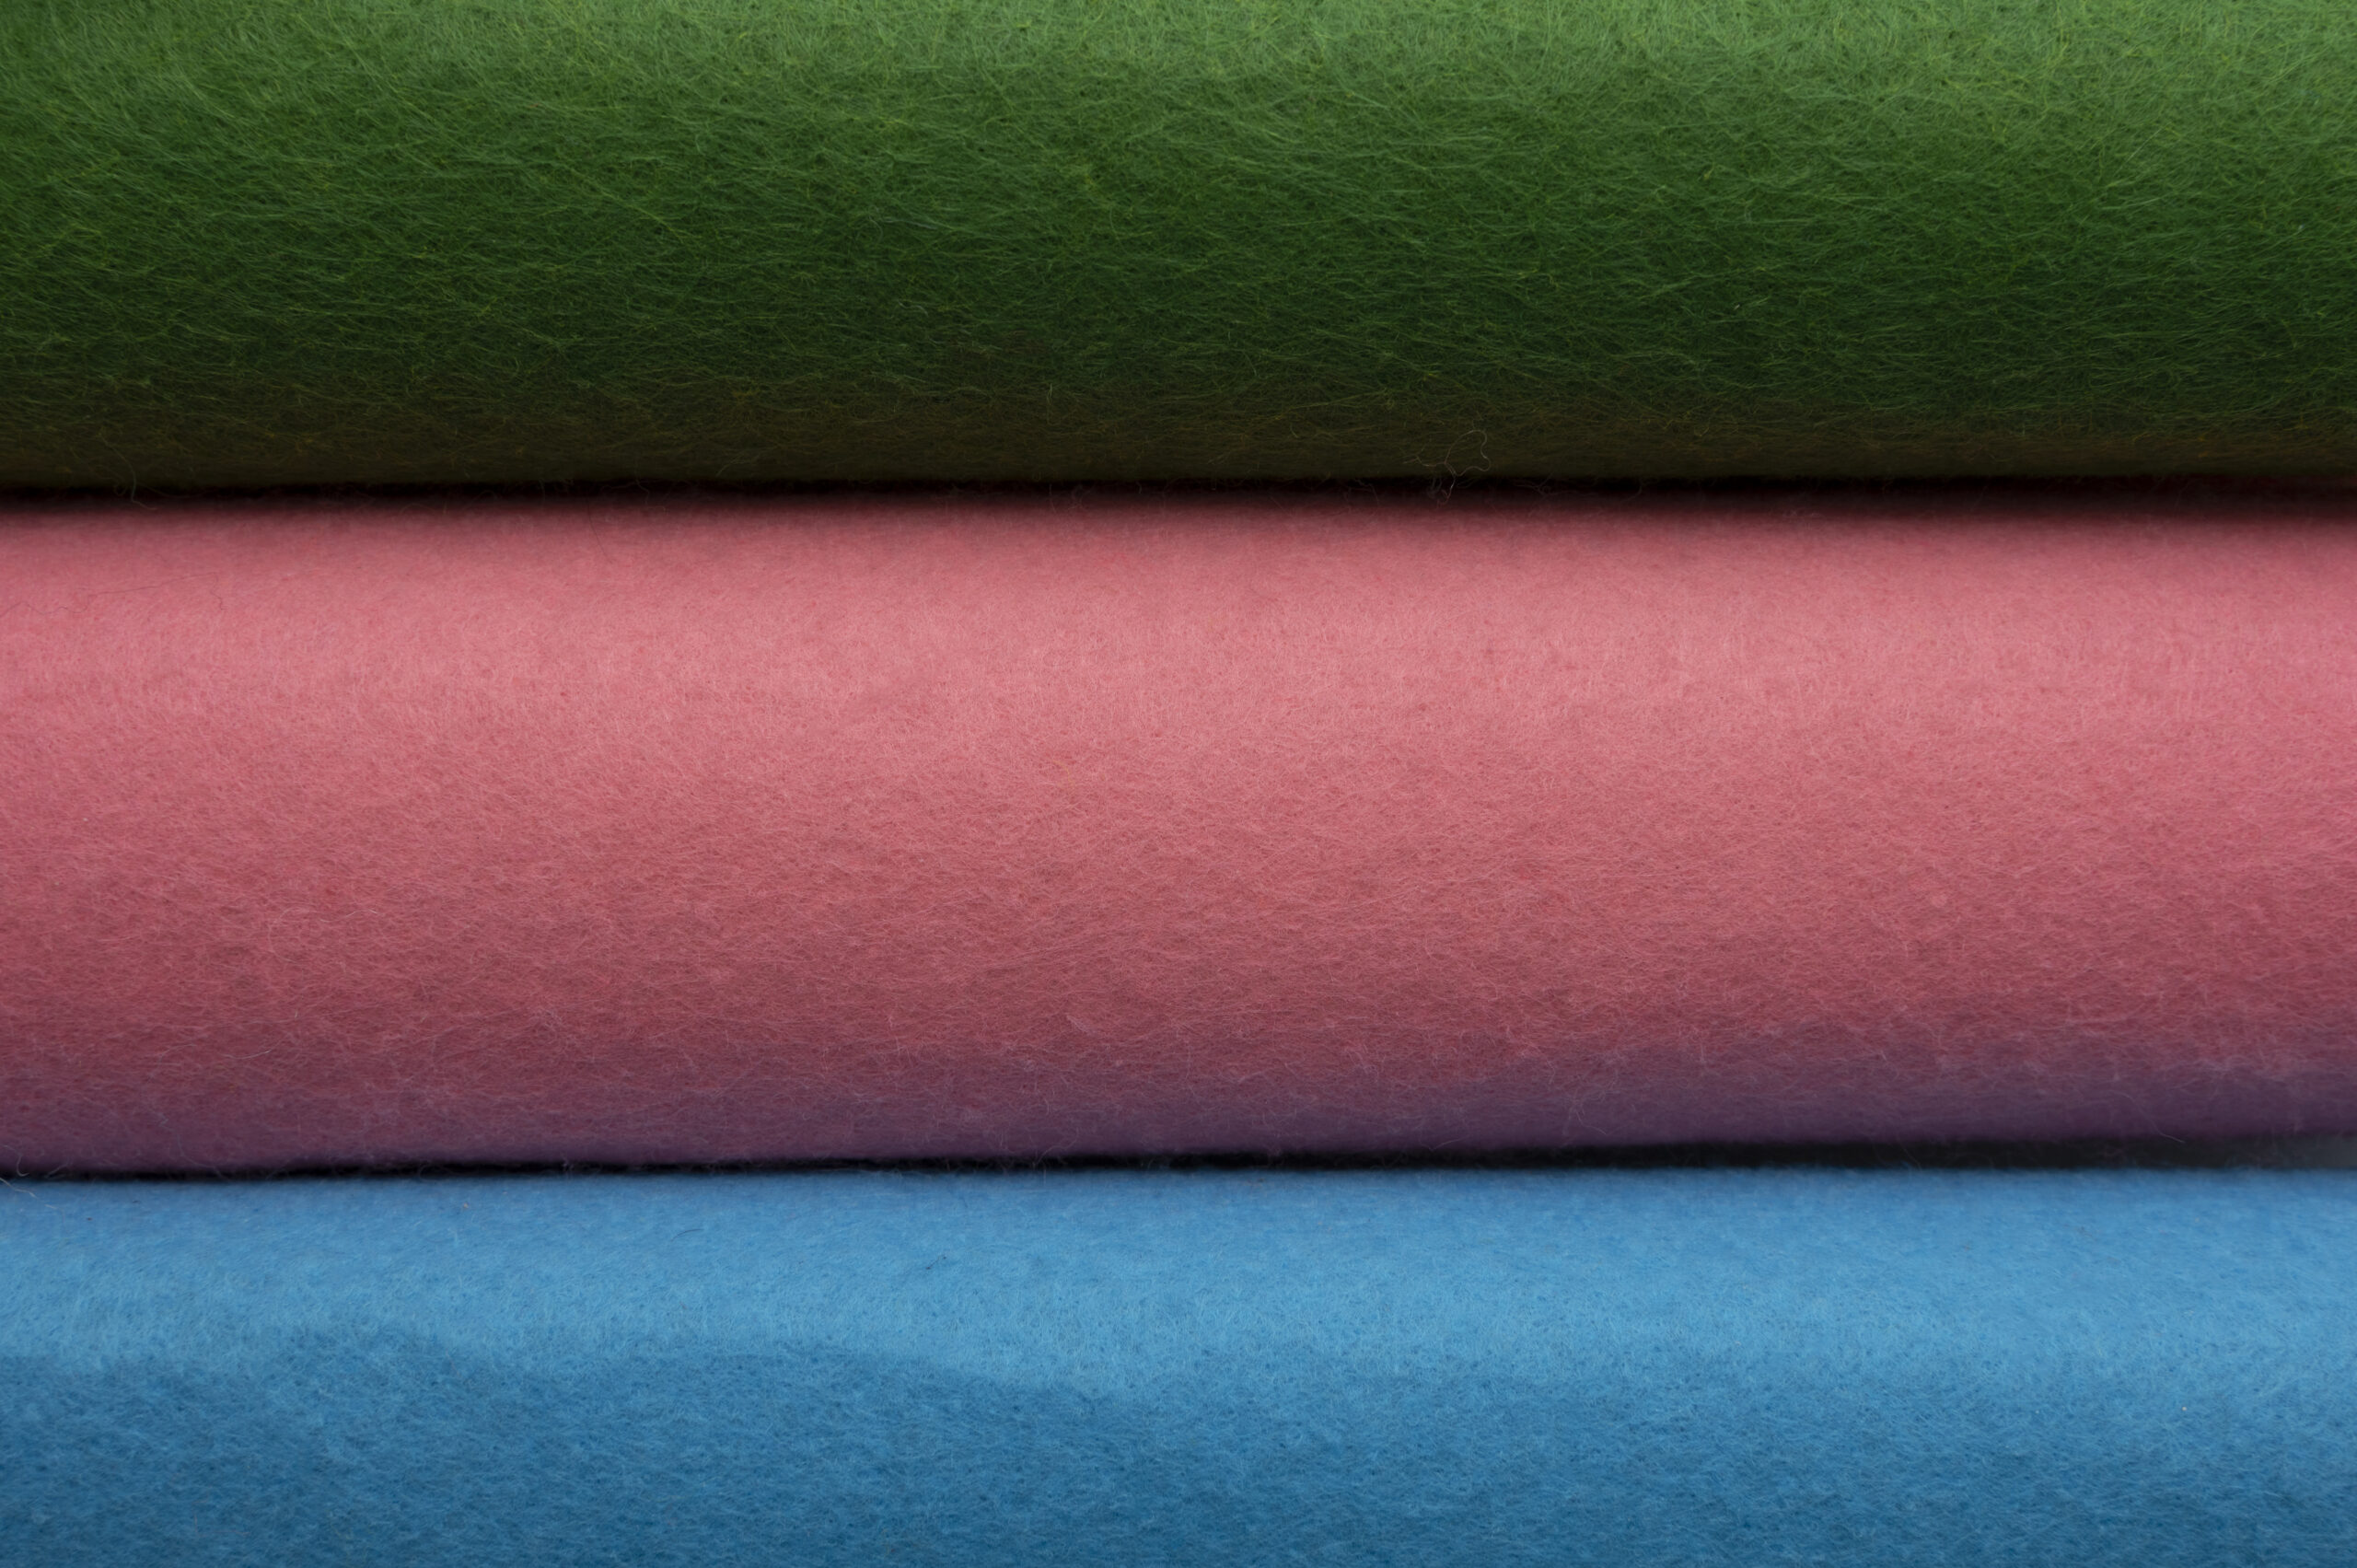 Differences Between Felt and Craft Burlap Fabric